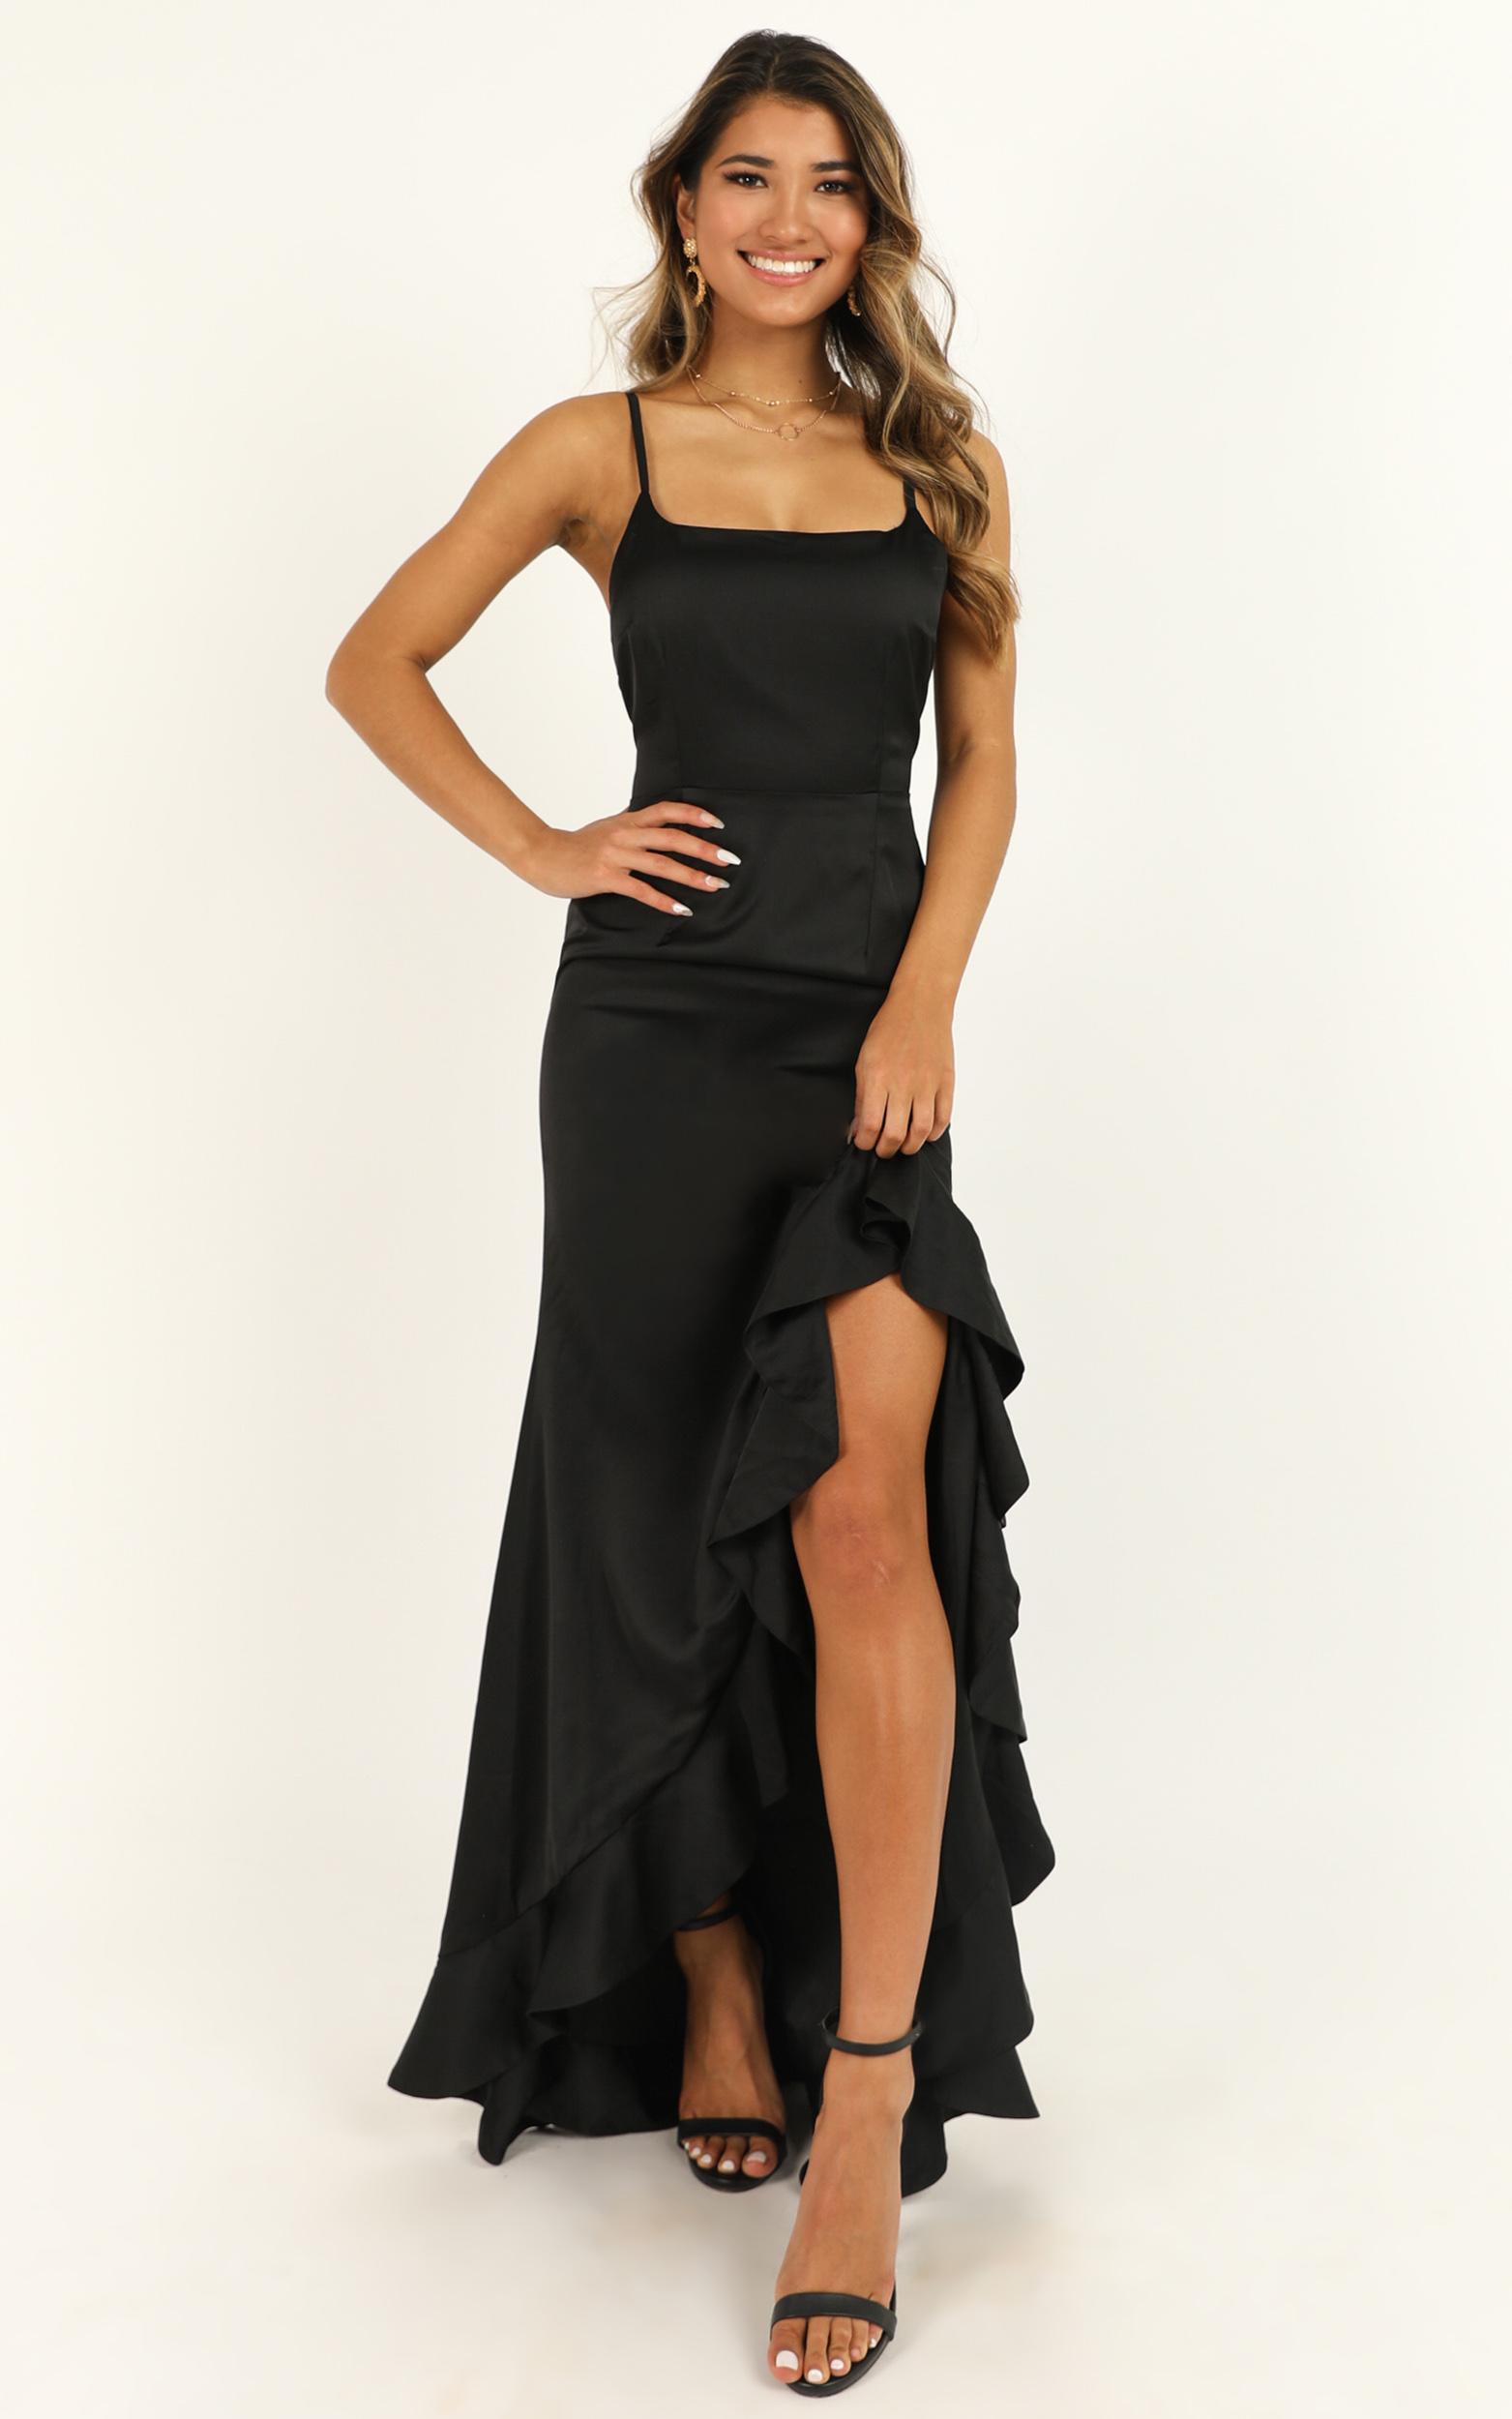 Find It In Your Heart Dress in black satin - 6 (XS), Black, hi-res image number null